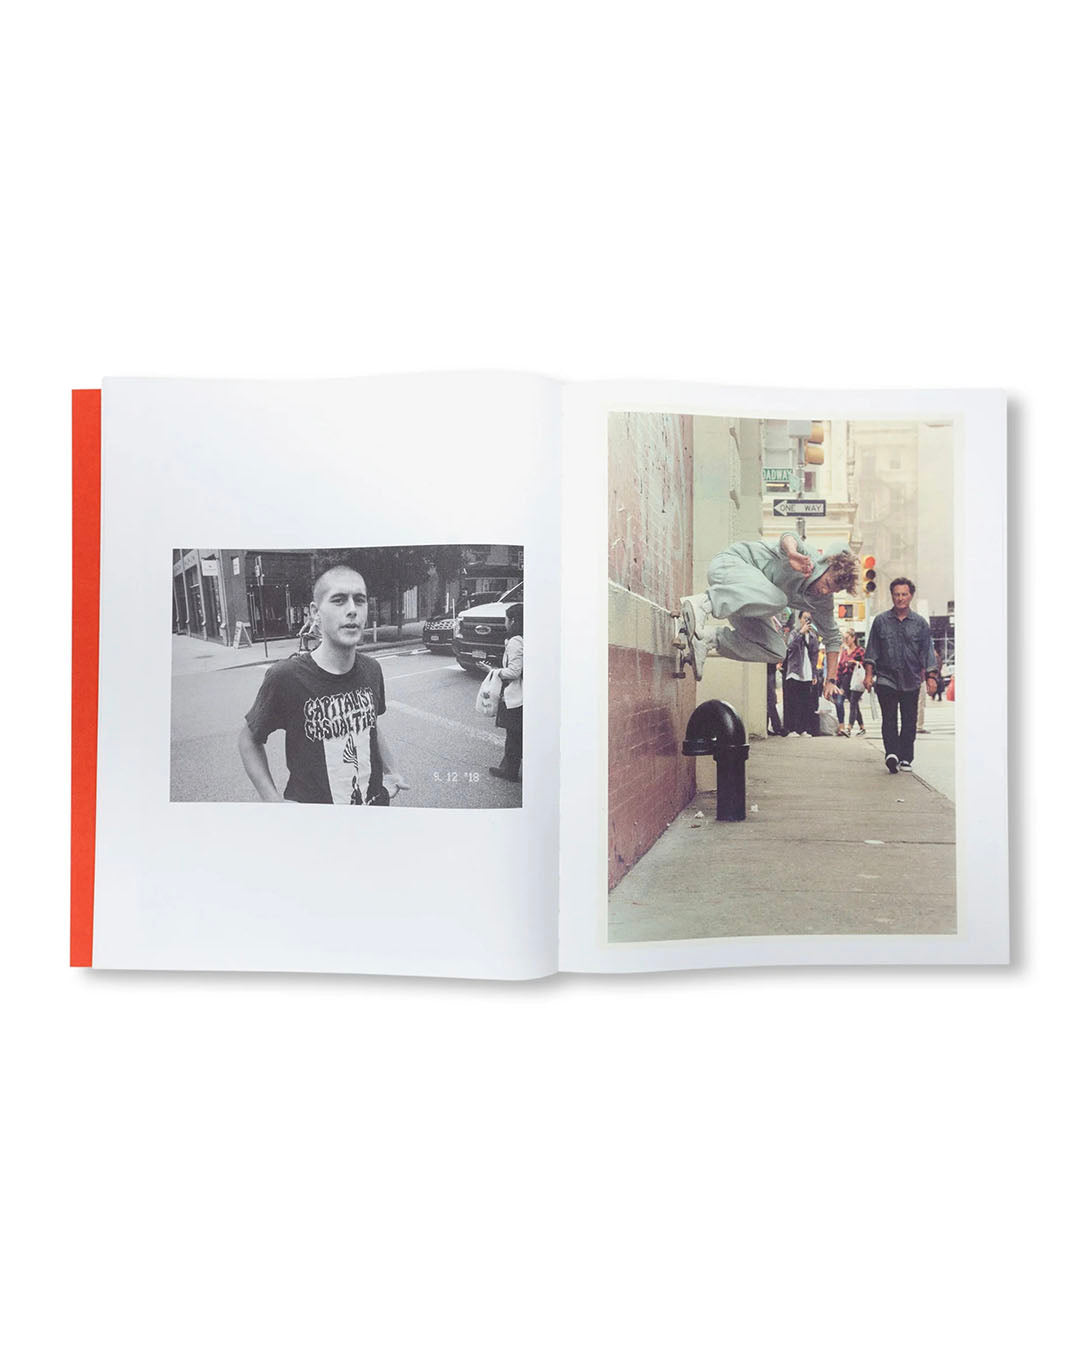 【QUENTIN DE BRIEY】THANK YOU FOR YOUR BUSINESS by Quentin de Briey [FIRST EDITION]